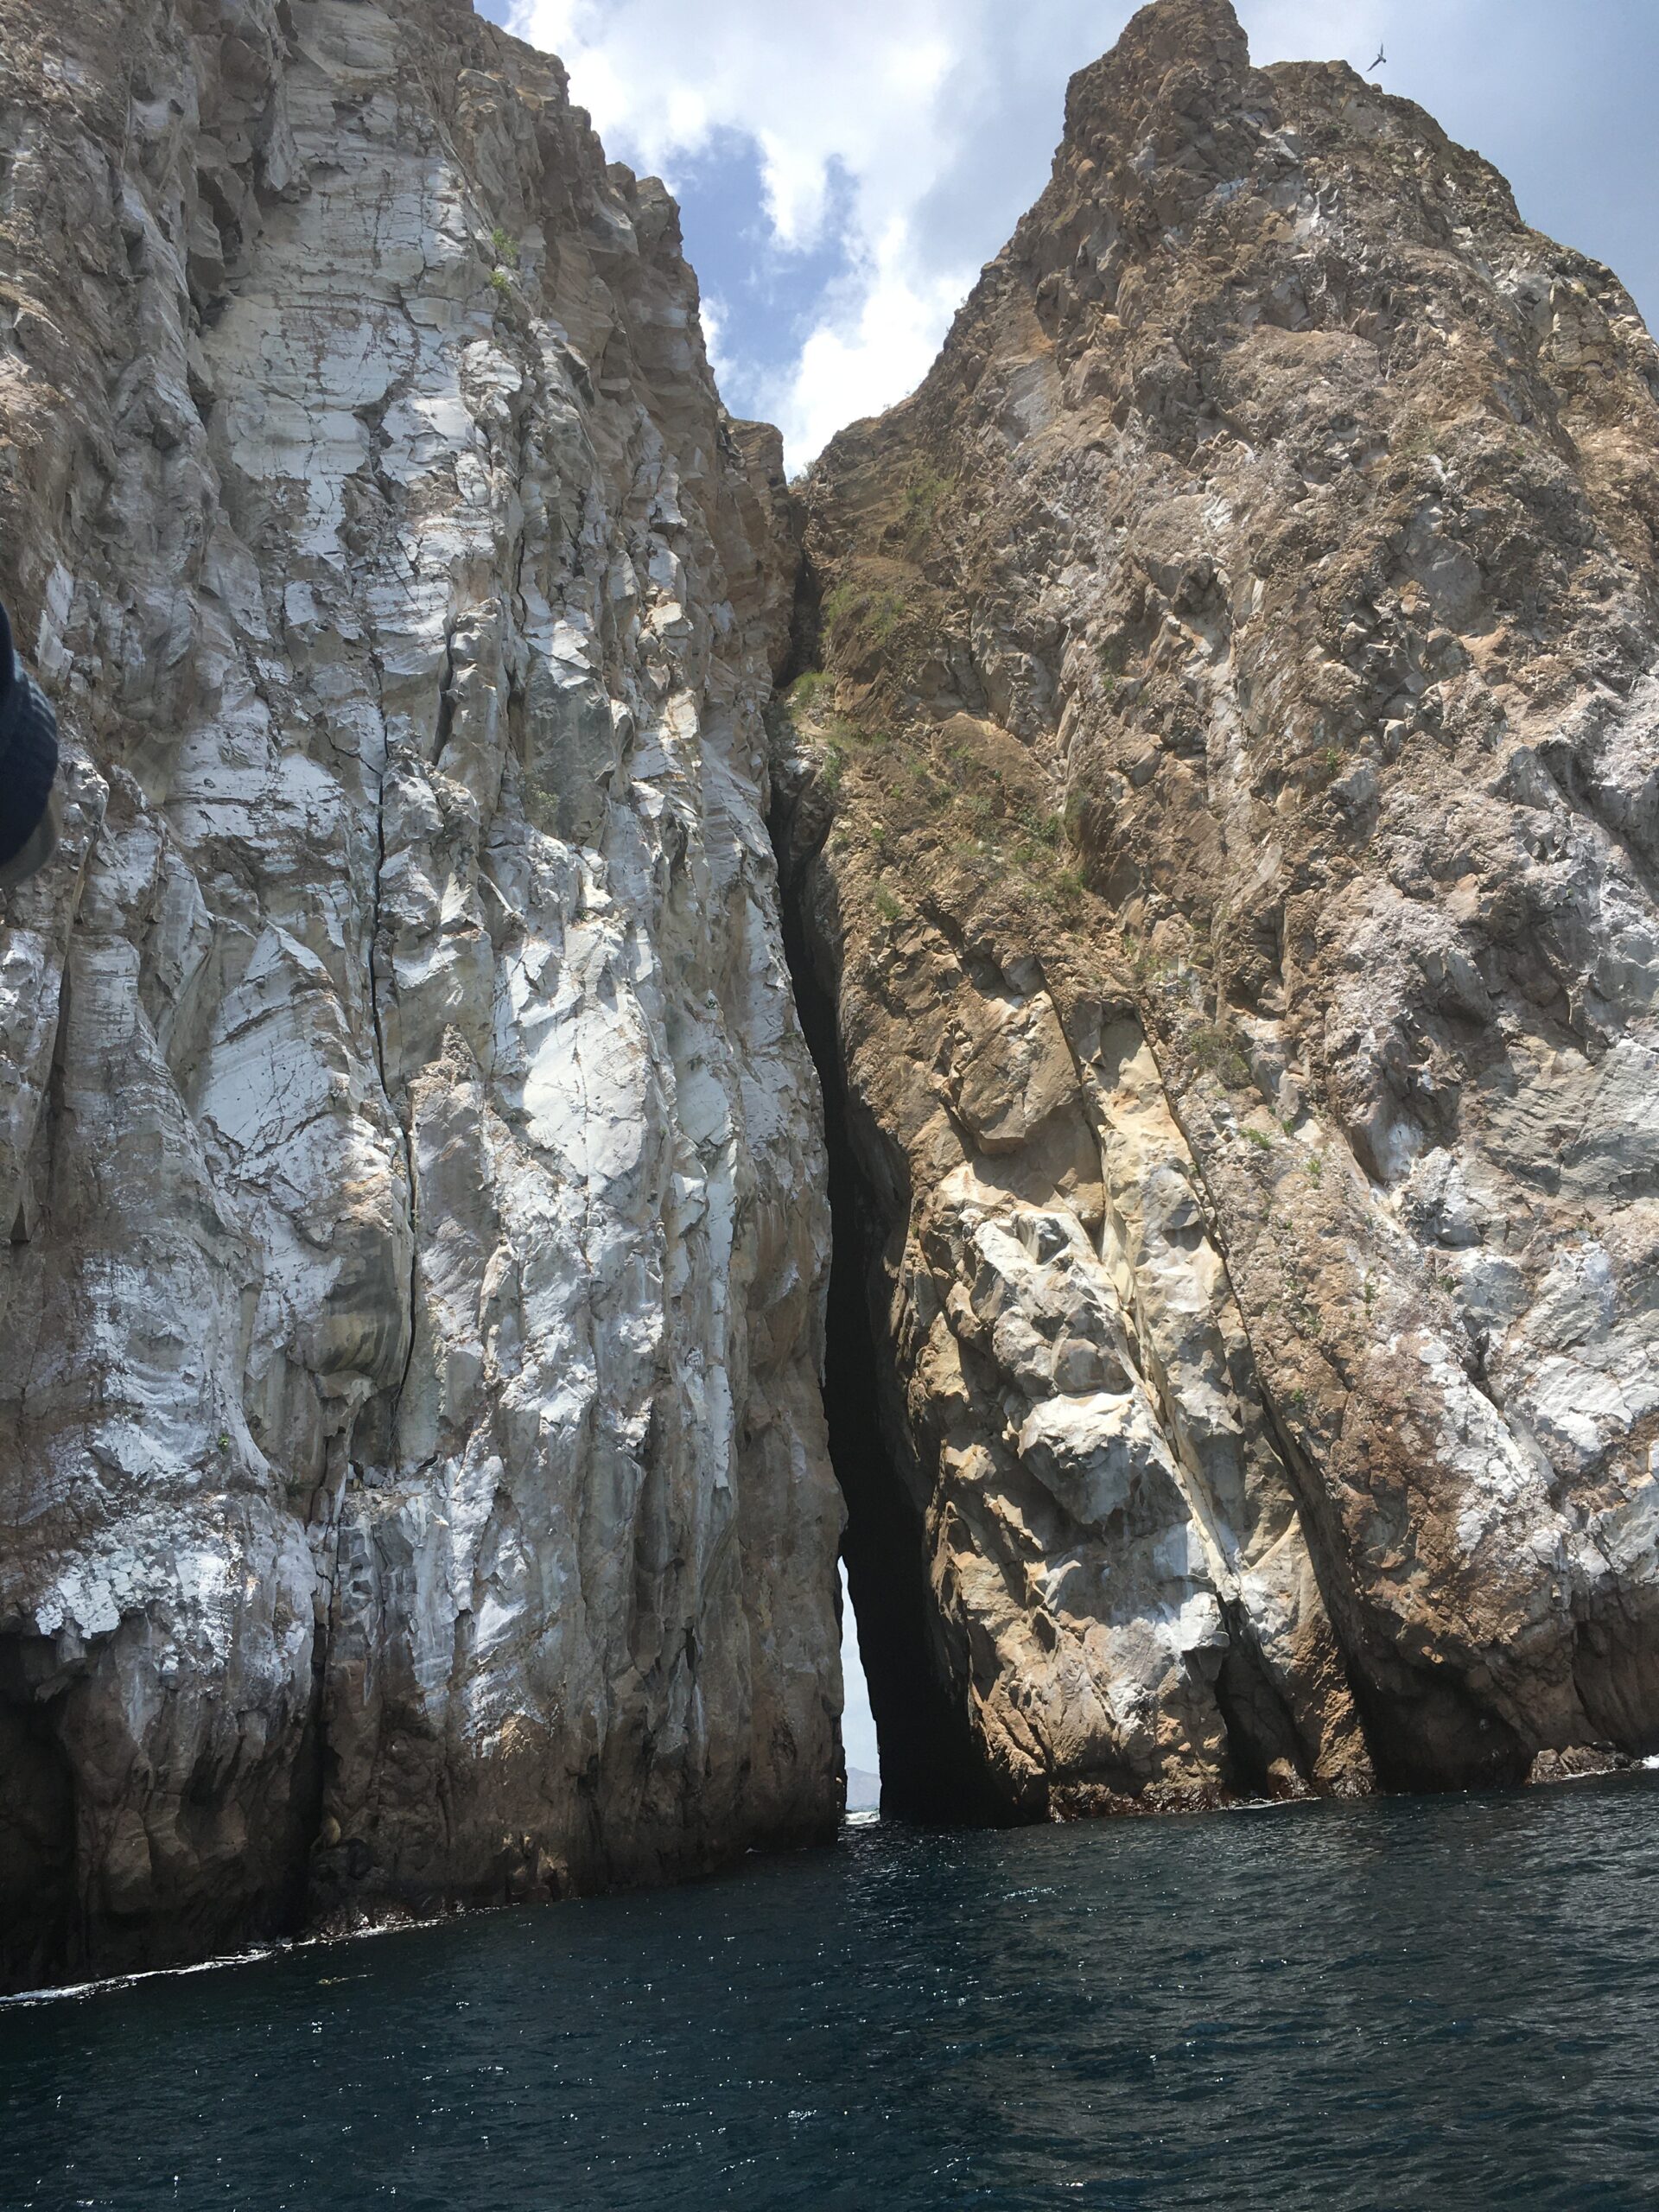 Pictured is part of Kicker Rock. From this viewpoint, it appears as two giant rocks in the pacific ocean. Both rocks are right next to each other with a small passageway in-between them. 